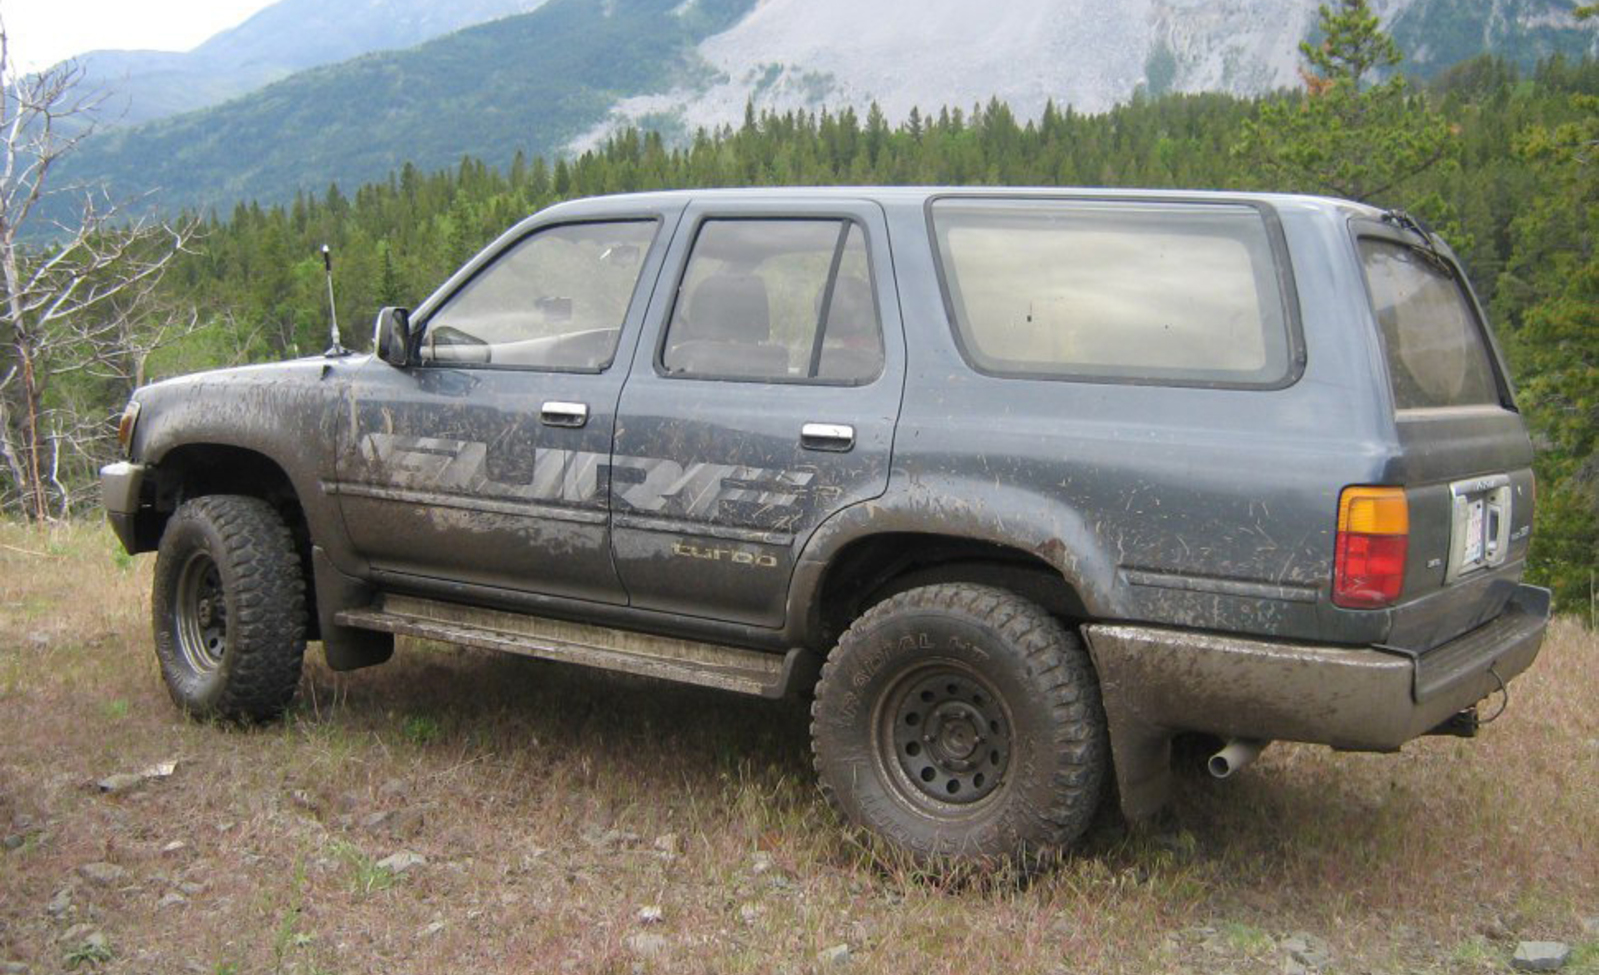 Toyota Hilux Surf 2.4 DT (97 Hp) 1988, 1989, 1990, 1991, 1992, 1993, 1994, 1995 